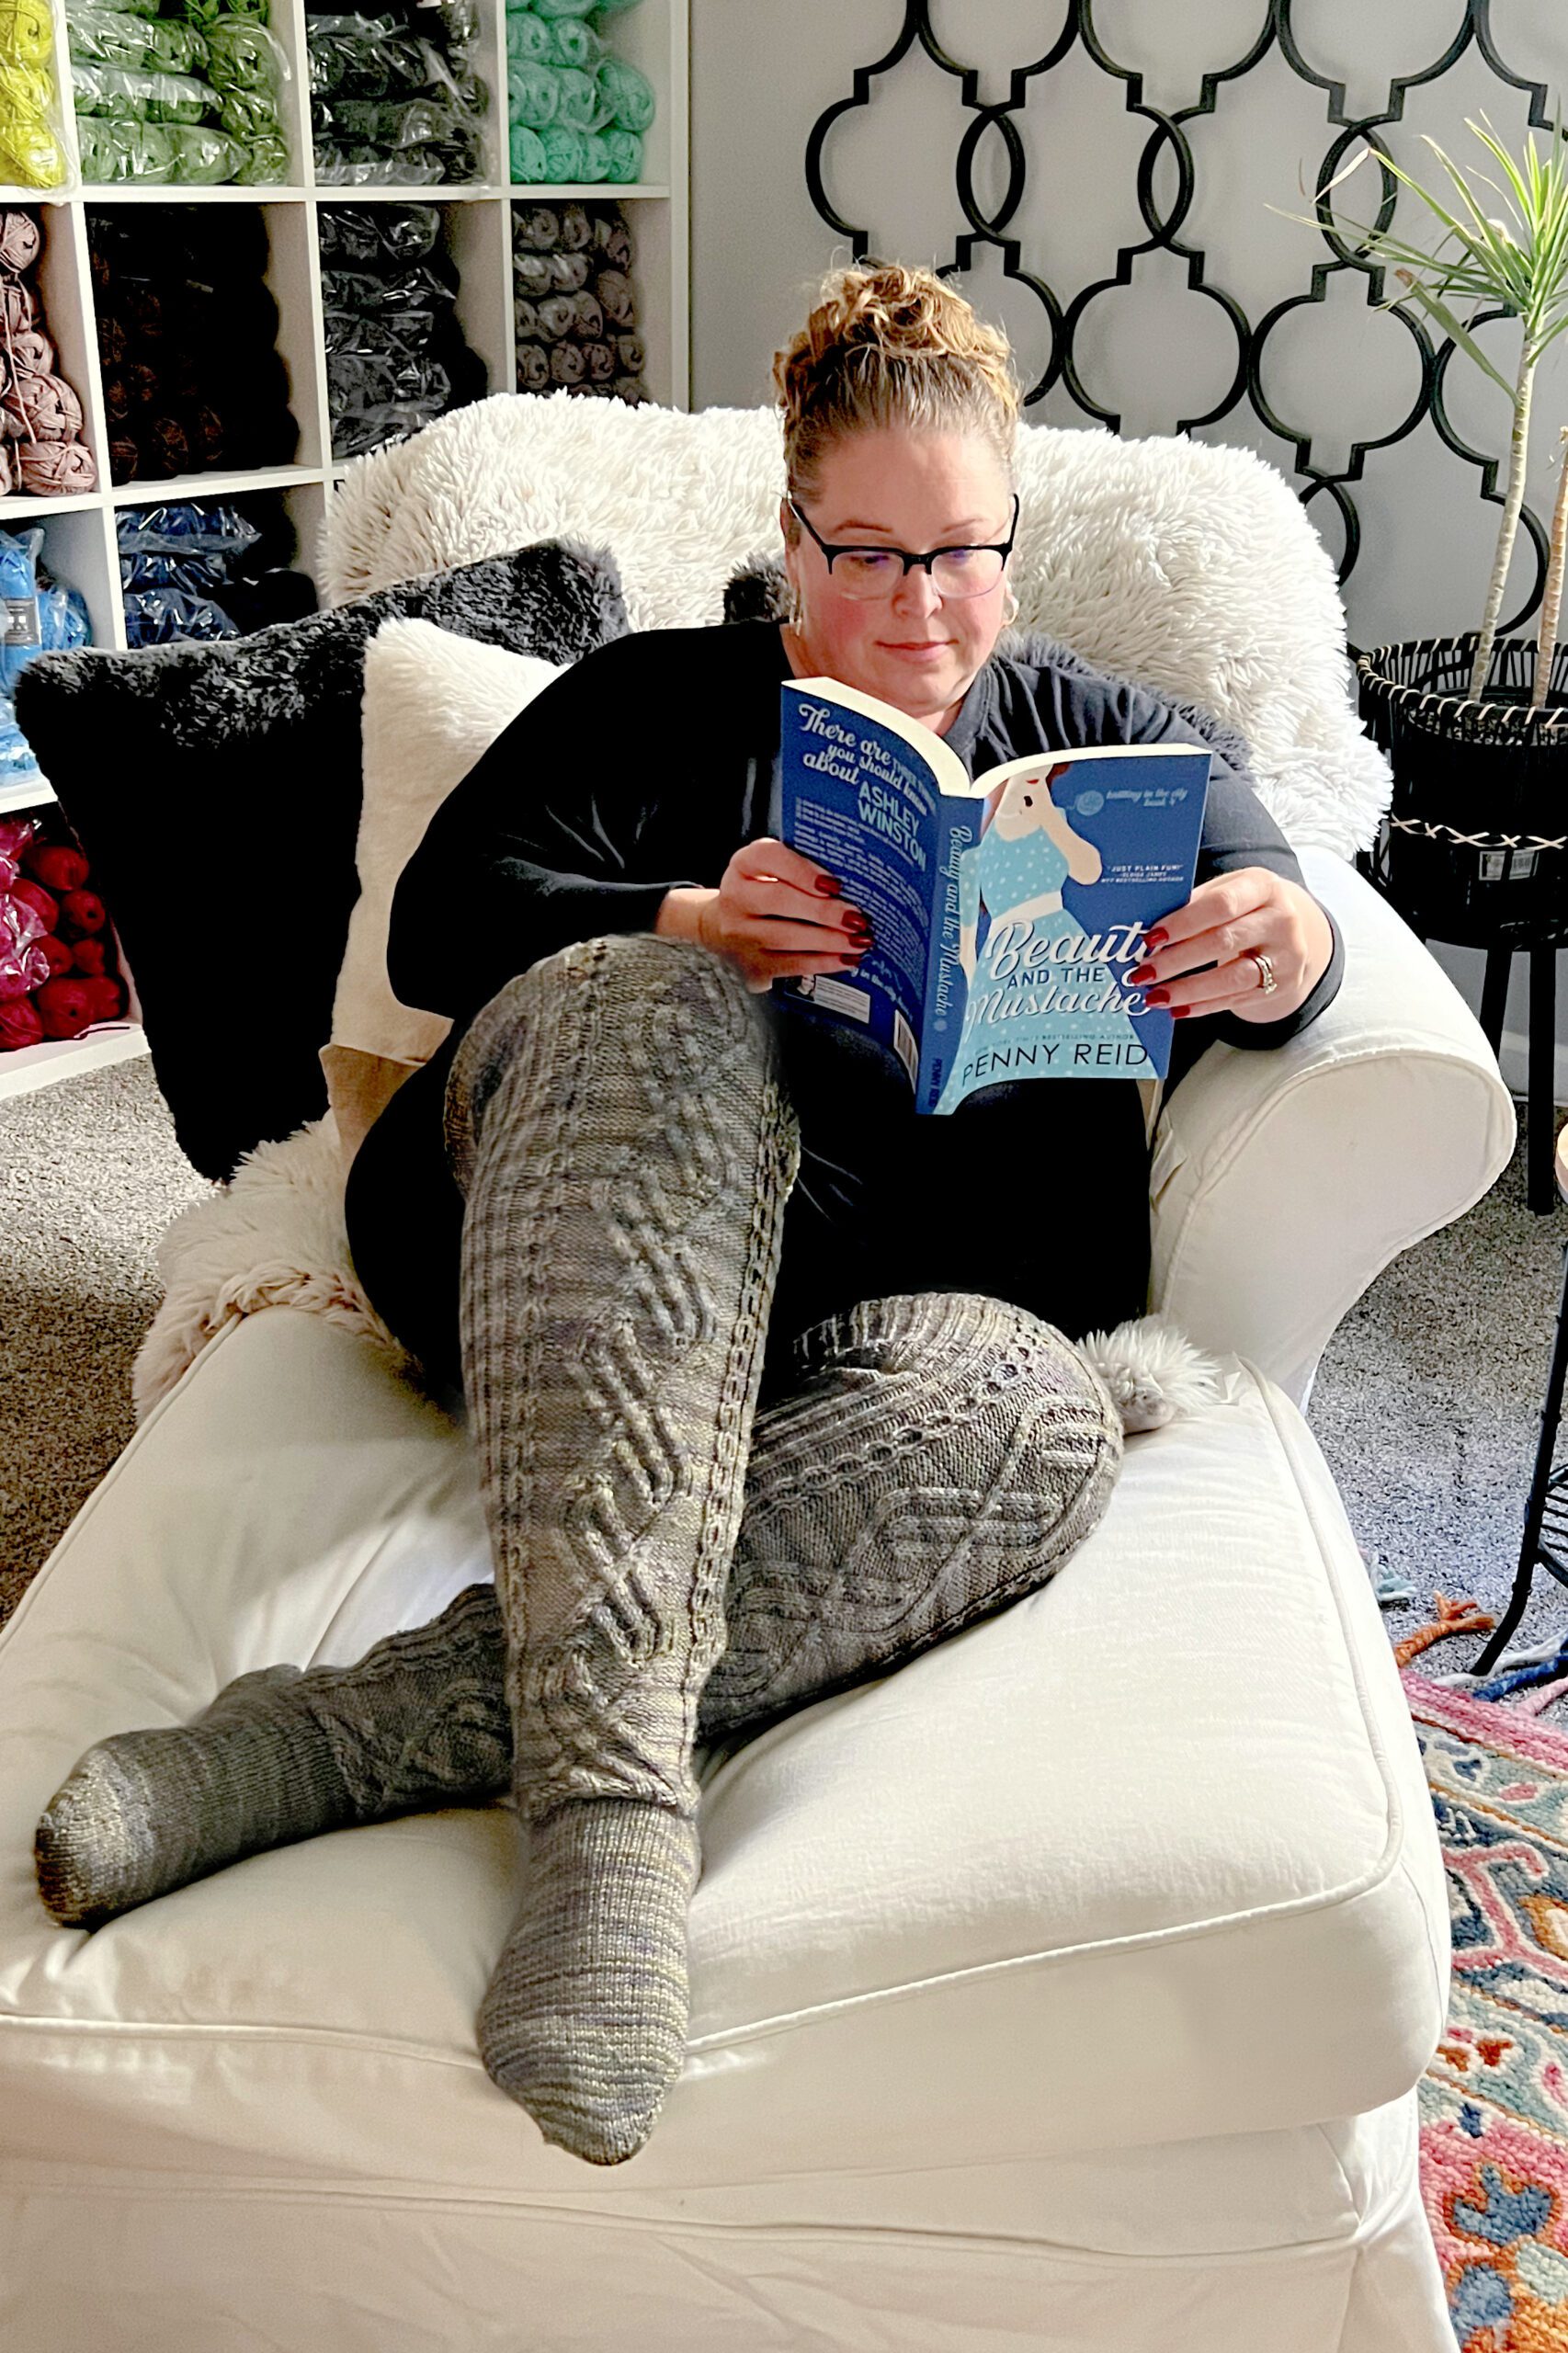 A person with glasses and a bun hairstyle is seated in a white armchair, reading "Beauty From Ashes" by Jenny Reid. Dressed in a black outfit with long knitted socks, they are surrounded by yarn organized on shelves, capturing the cozy essence of Marly Bird's tutorial space amidst modern decor. -Marly Bird